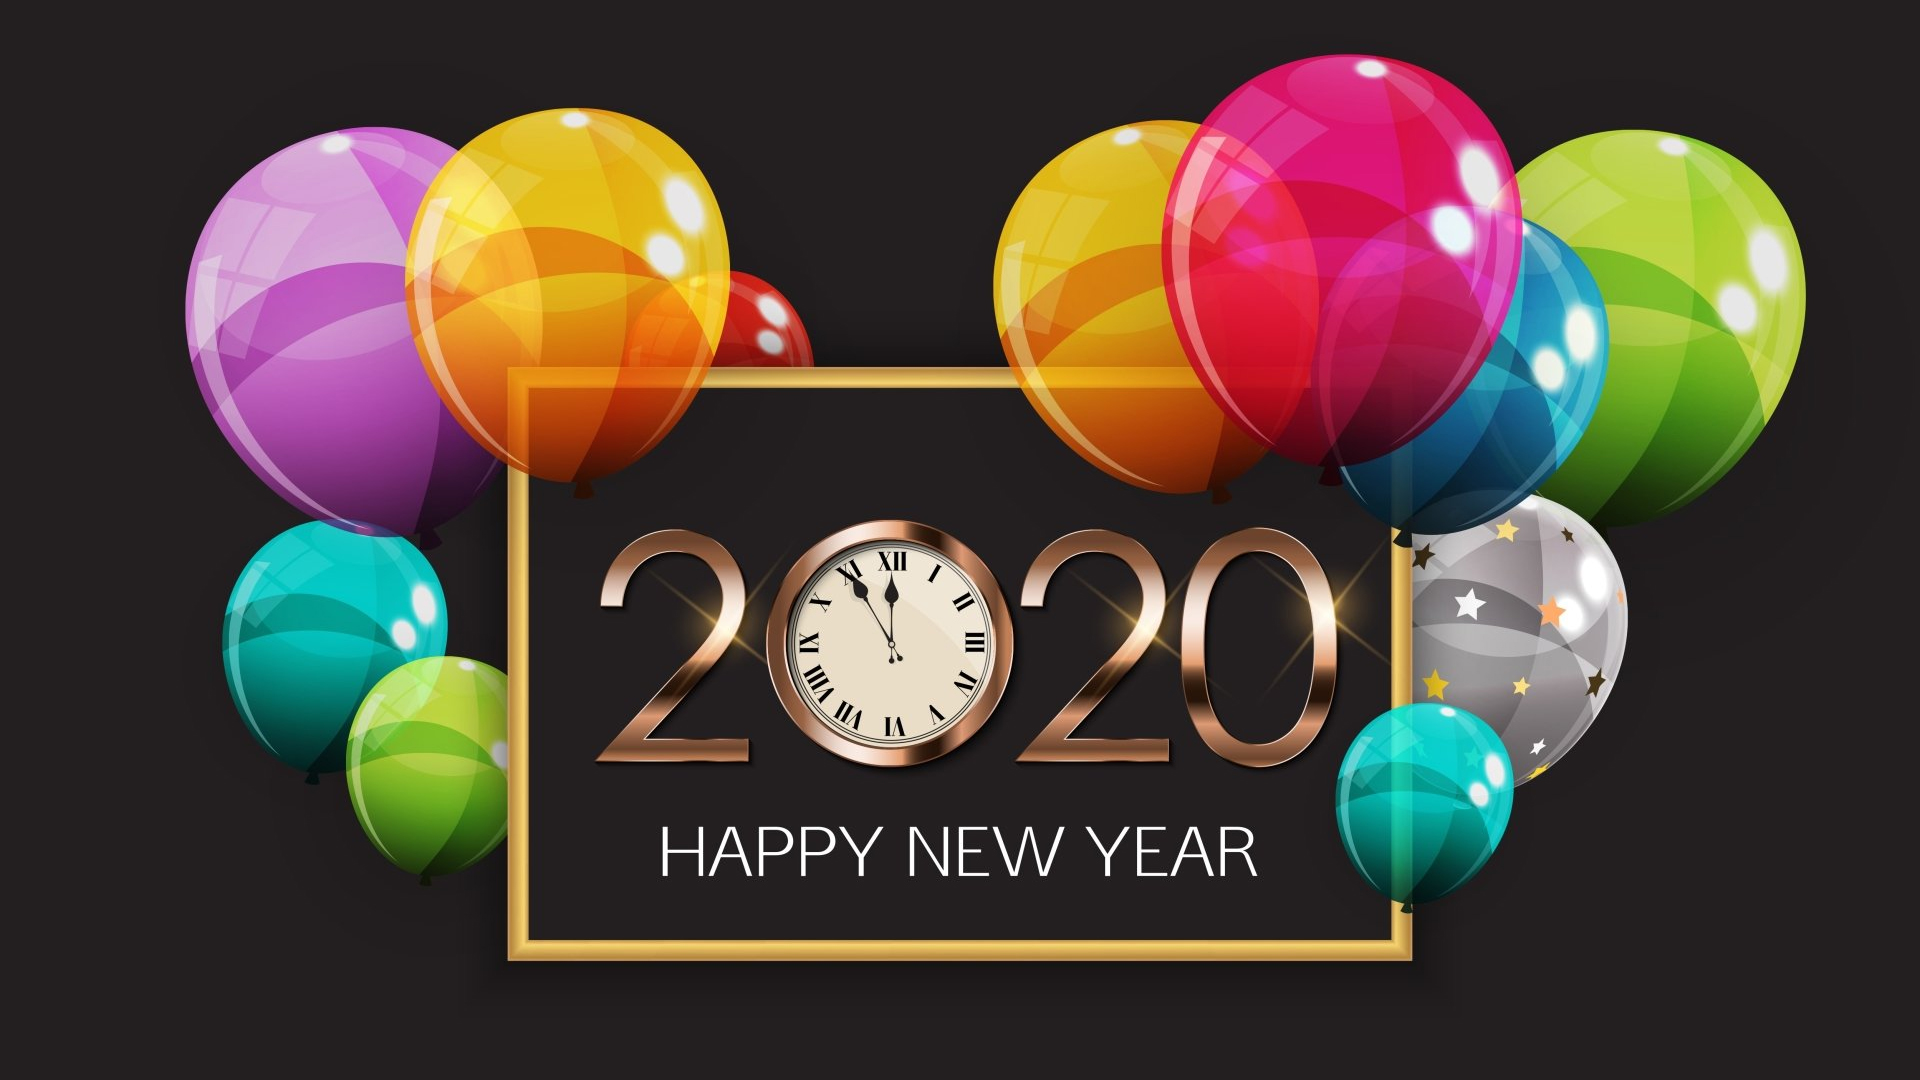 Happy New Year 2020 Greeting Card Free Images - Happy New Year 2020 - HD Wallpaper 